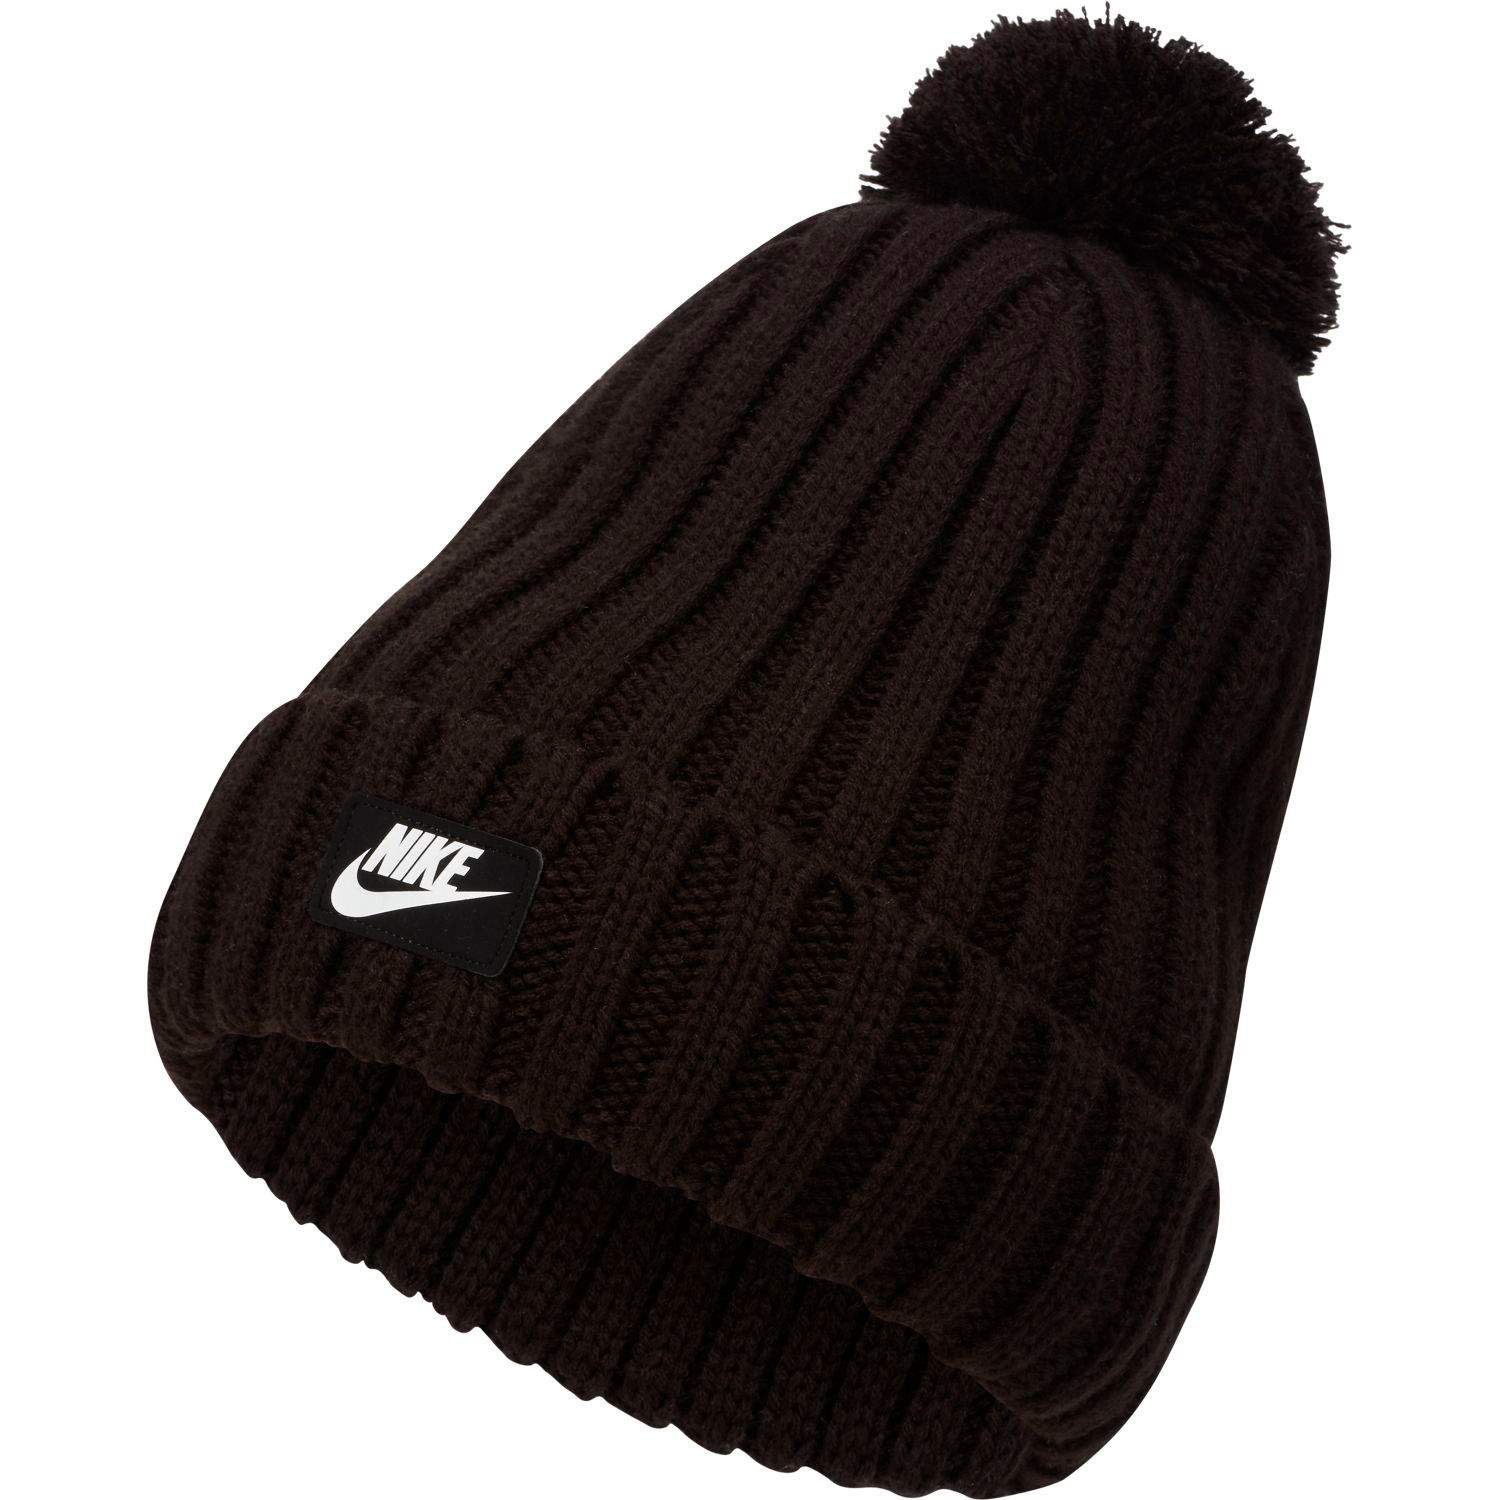 nike wooly hat